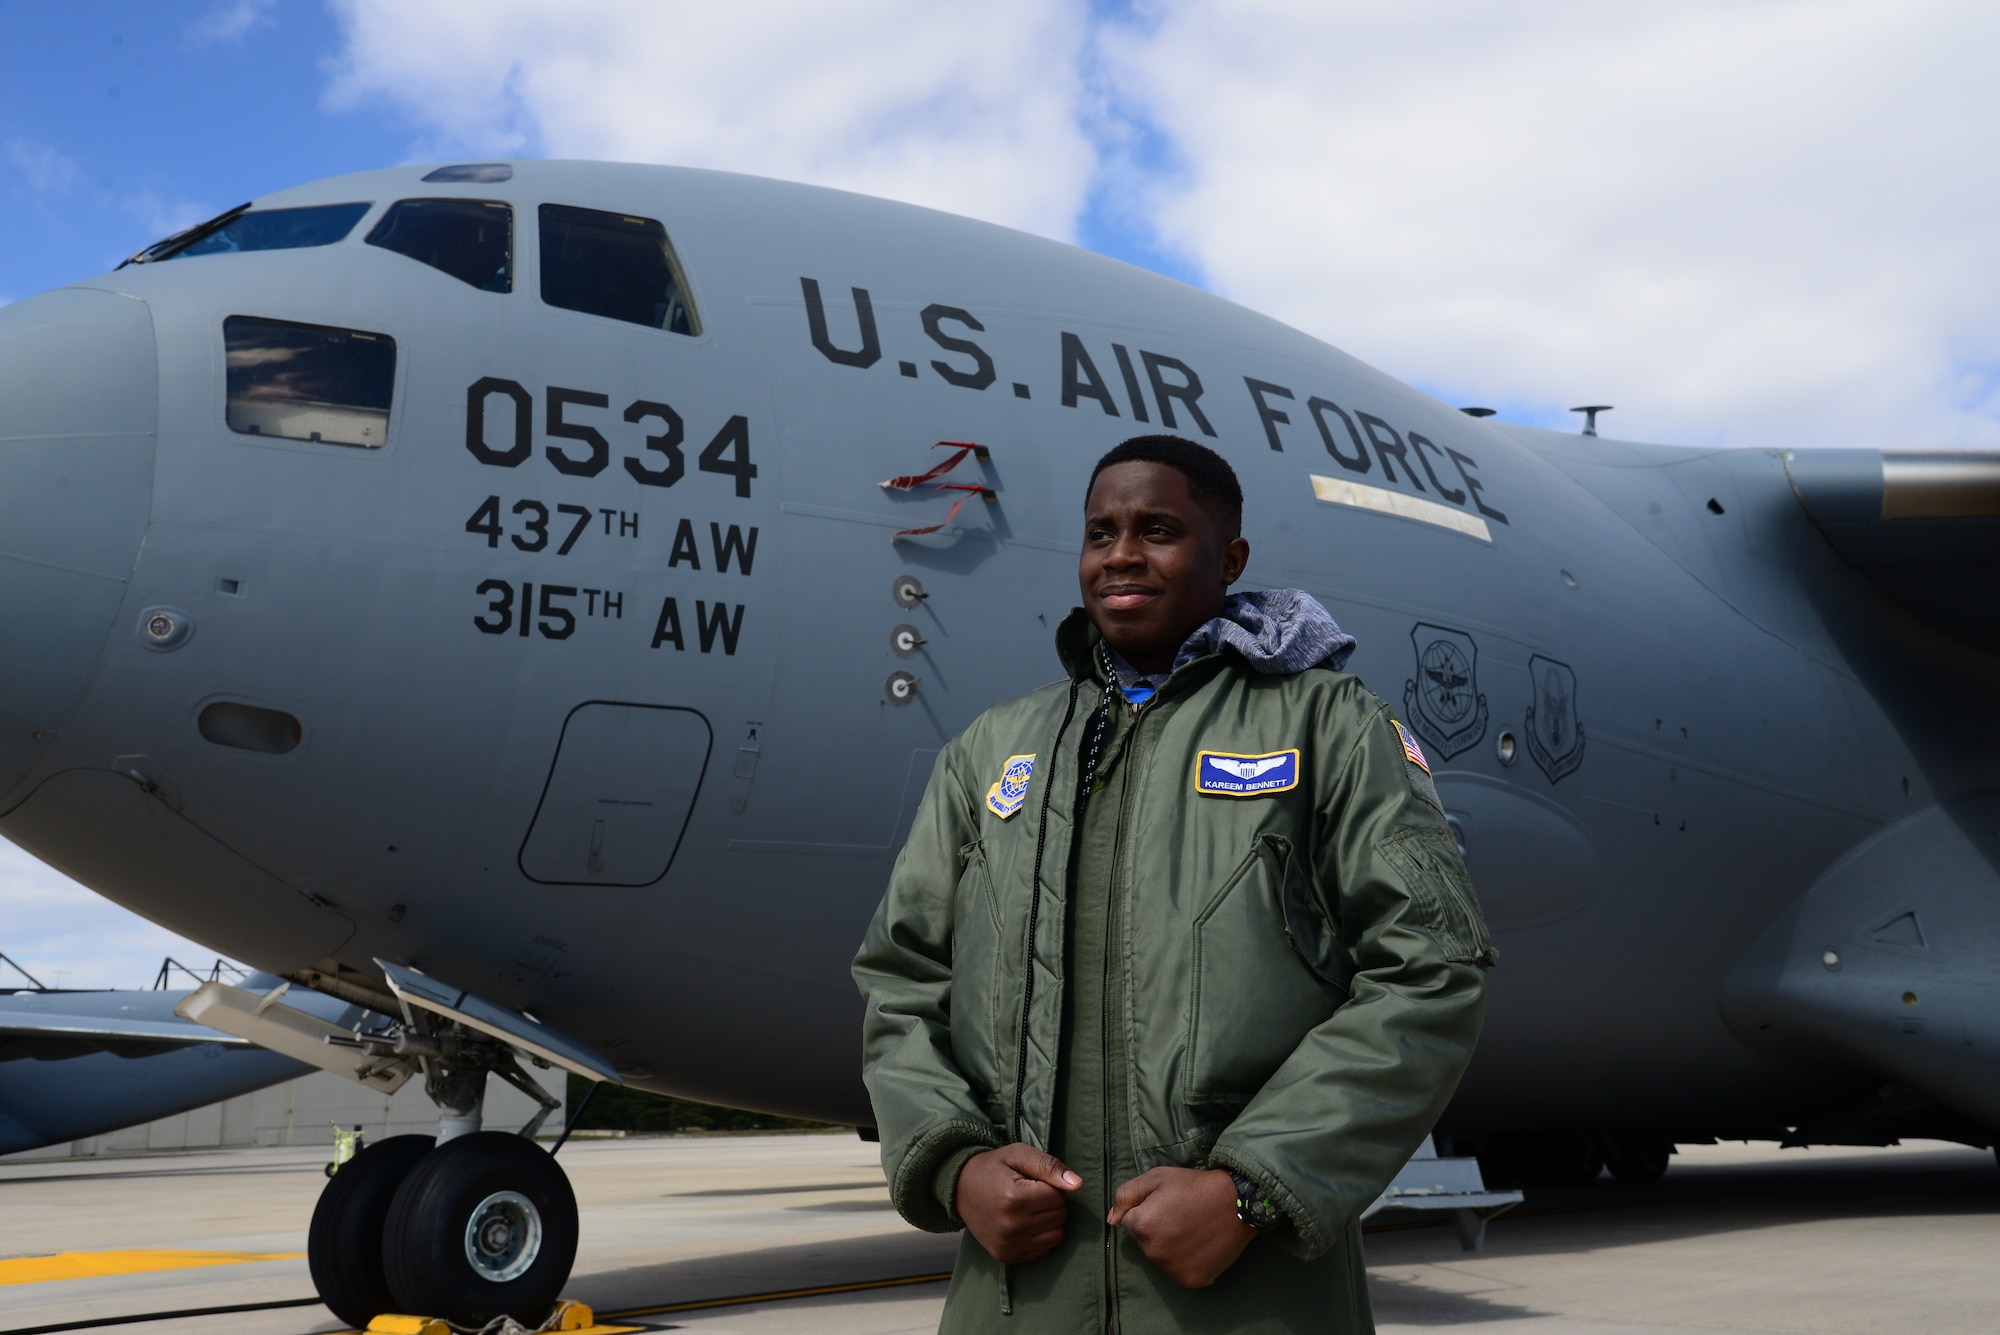 Kareem Bennett, 3rd Airlift Squadron honorary pilot for a day, stands in front of a C-17 Globemaster III March 16, 2018, on the flightline at Dover Air Force Base, Del. Bennett, a patient at Alfred I. duPont Hospital for Children in Wilmington, Del., was invited by the squadron to spend the day with them and learn what the Air Force is all about. (U.S. Air Force photo by Staff Sgt. Aaron J. Jenne)